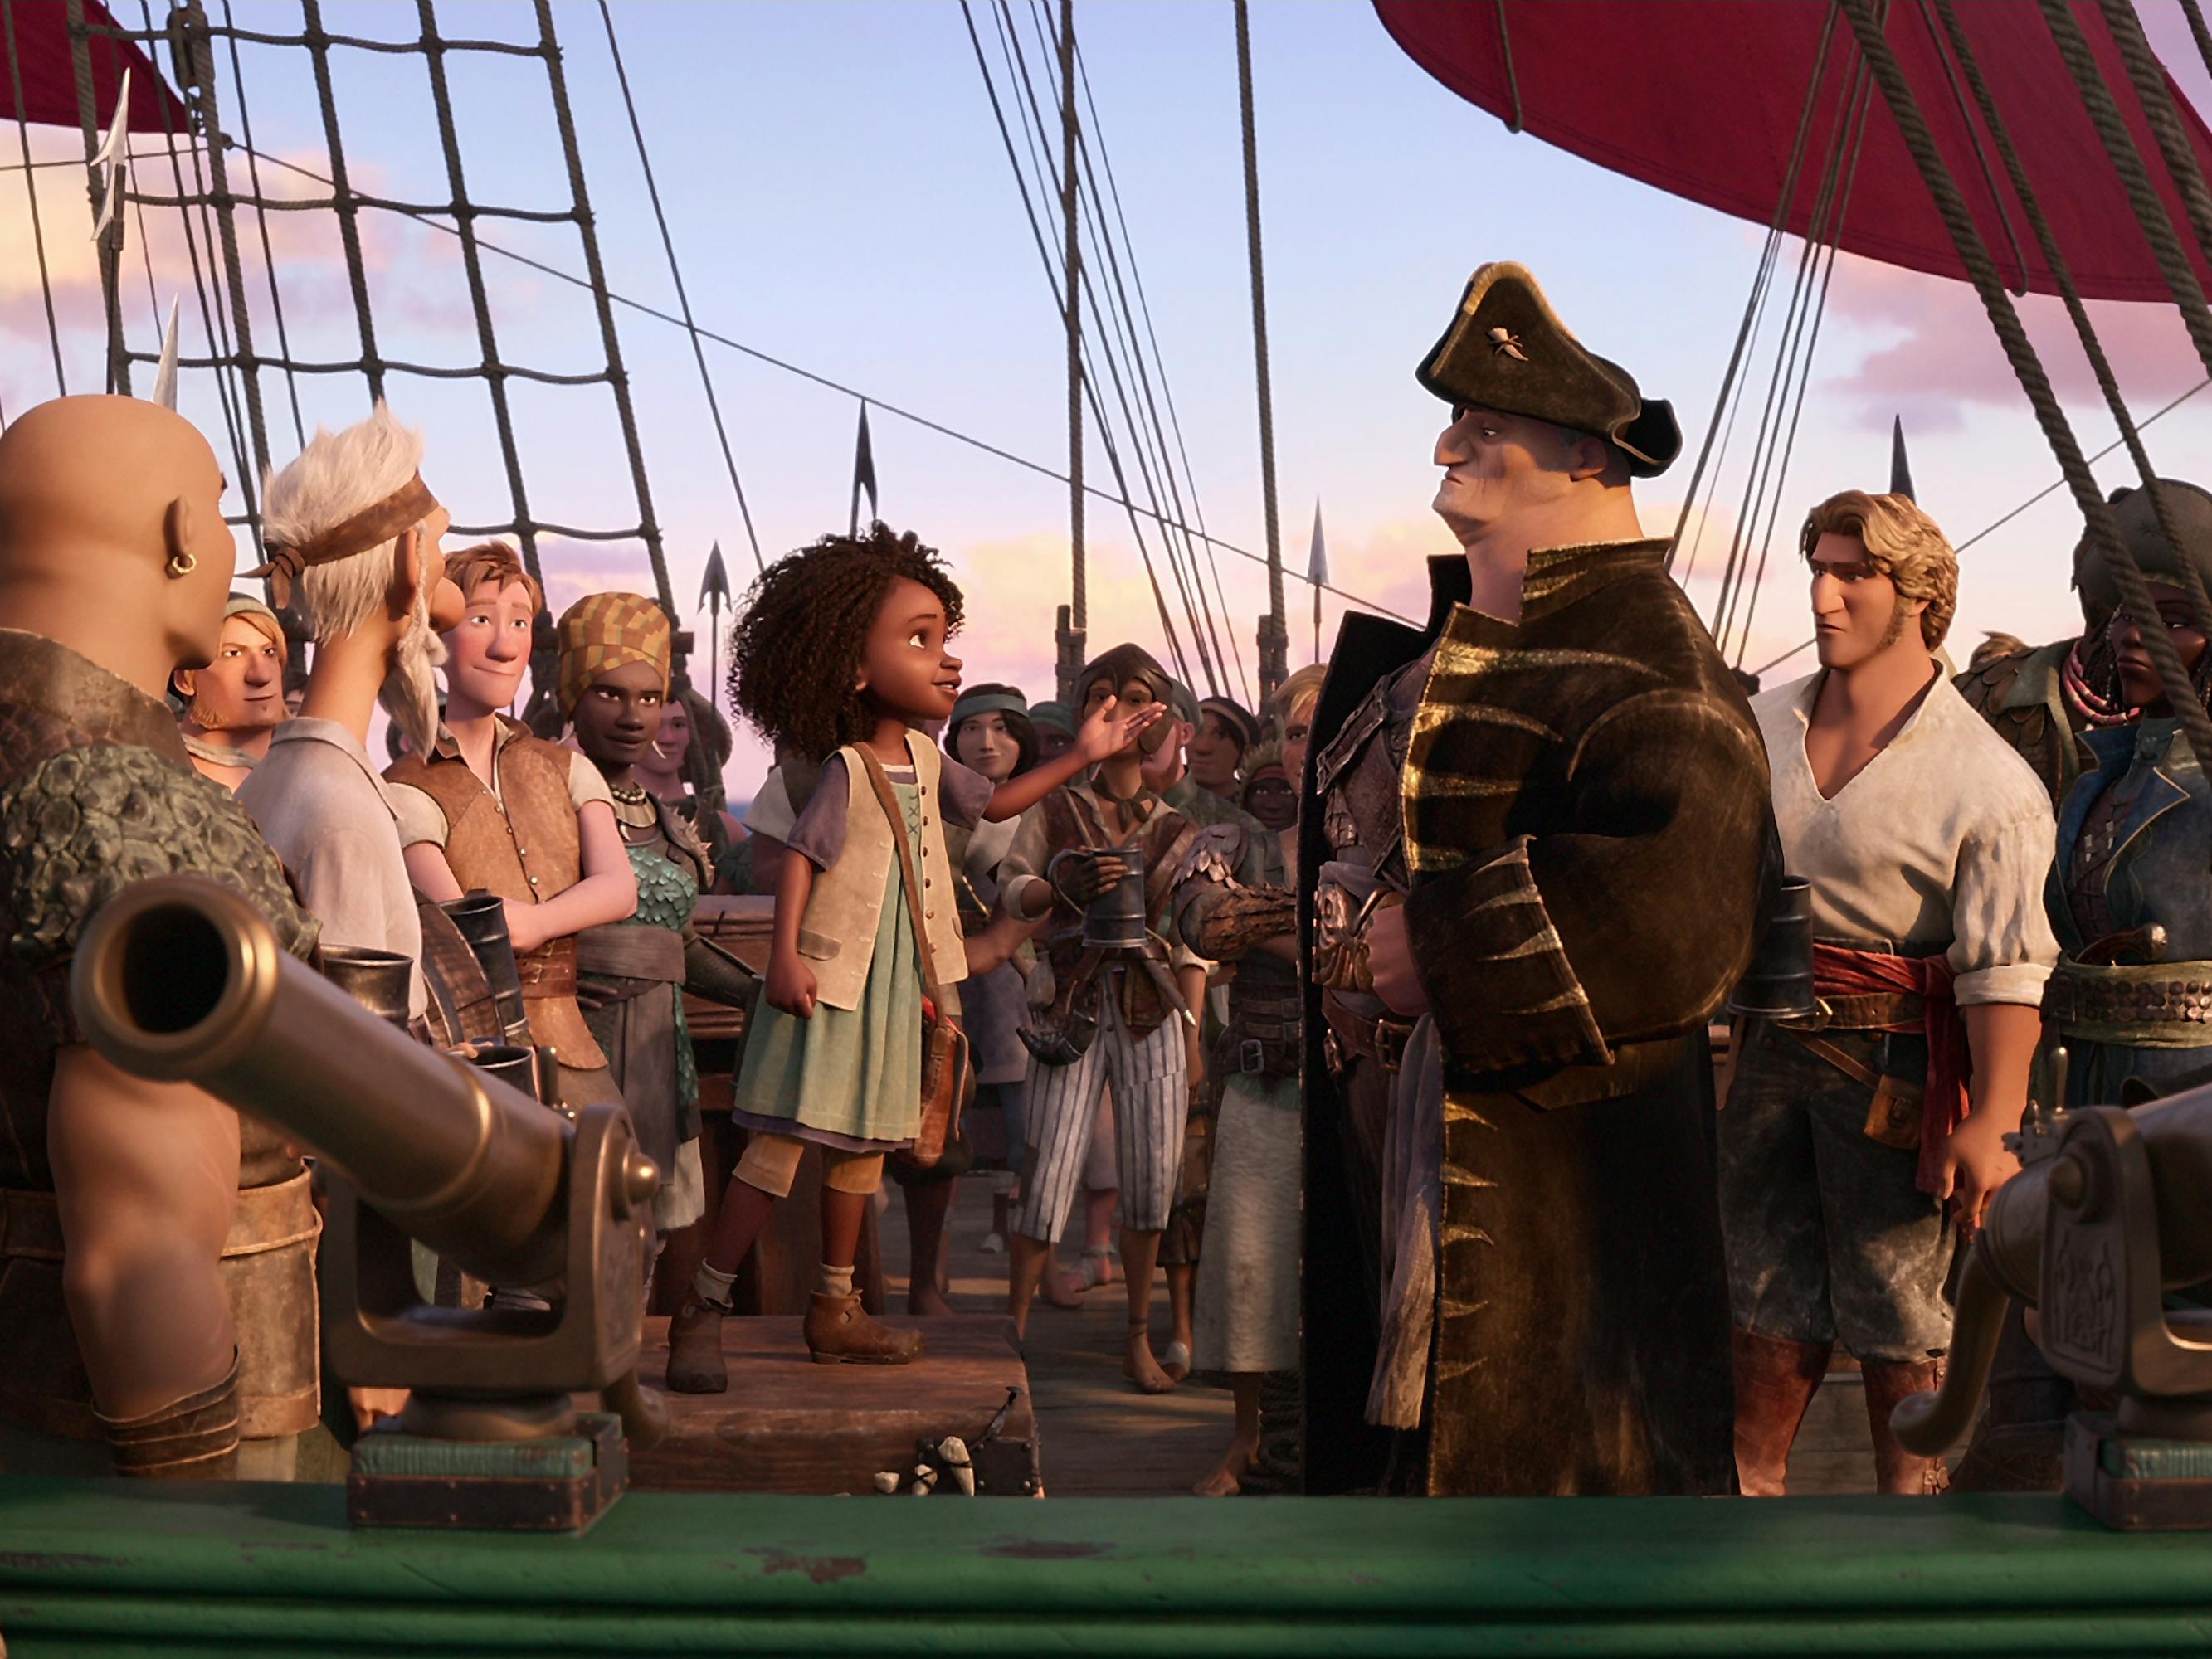 Maisie Brumble (Zaris-Angel Hator), Captain Crow (Jared Harris), Jacob Holland (Karl Urban), and First Mate Sarah Sharpe (Marianne Jean-Baptiste) stand around the deck of the boat, surrounded by tons of other crew mates. 